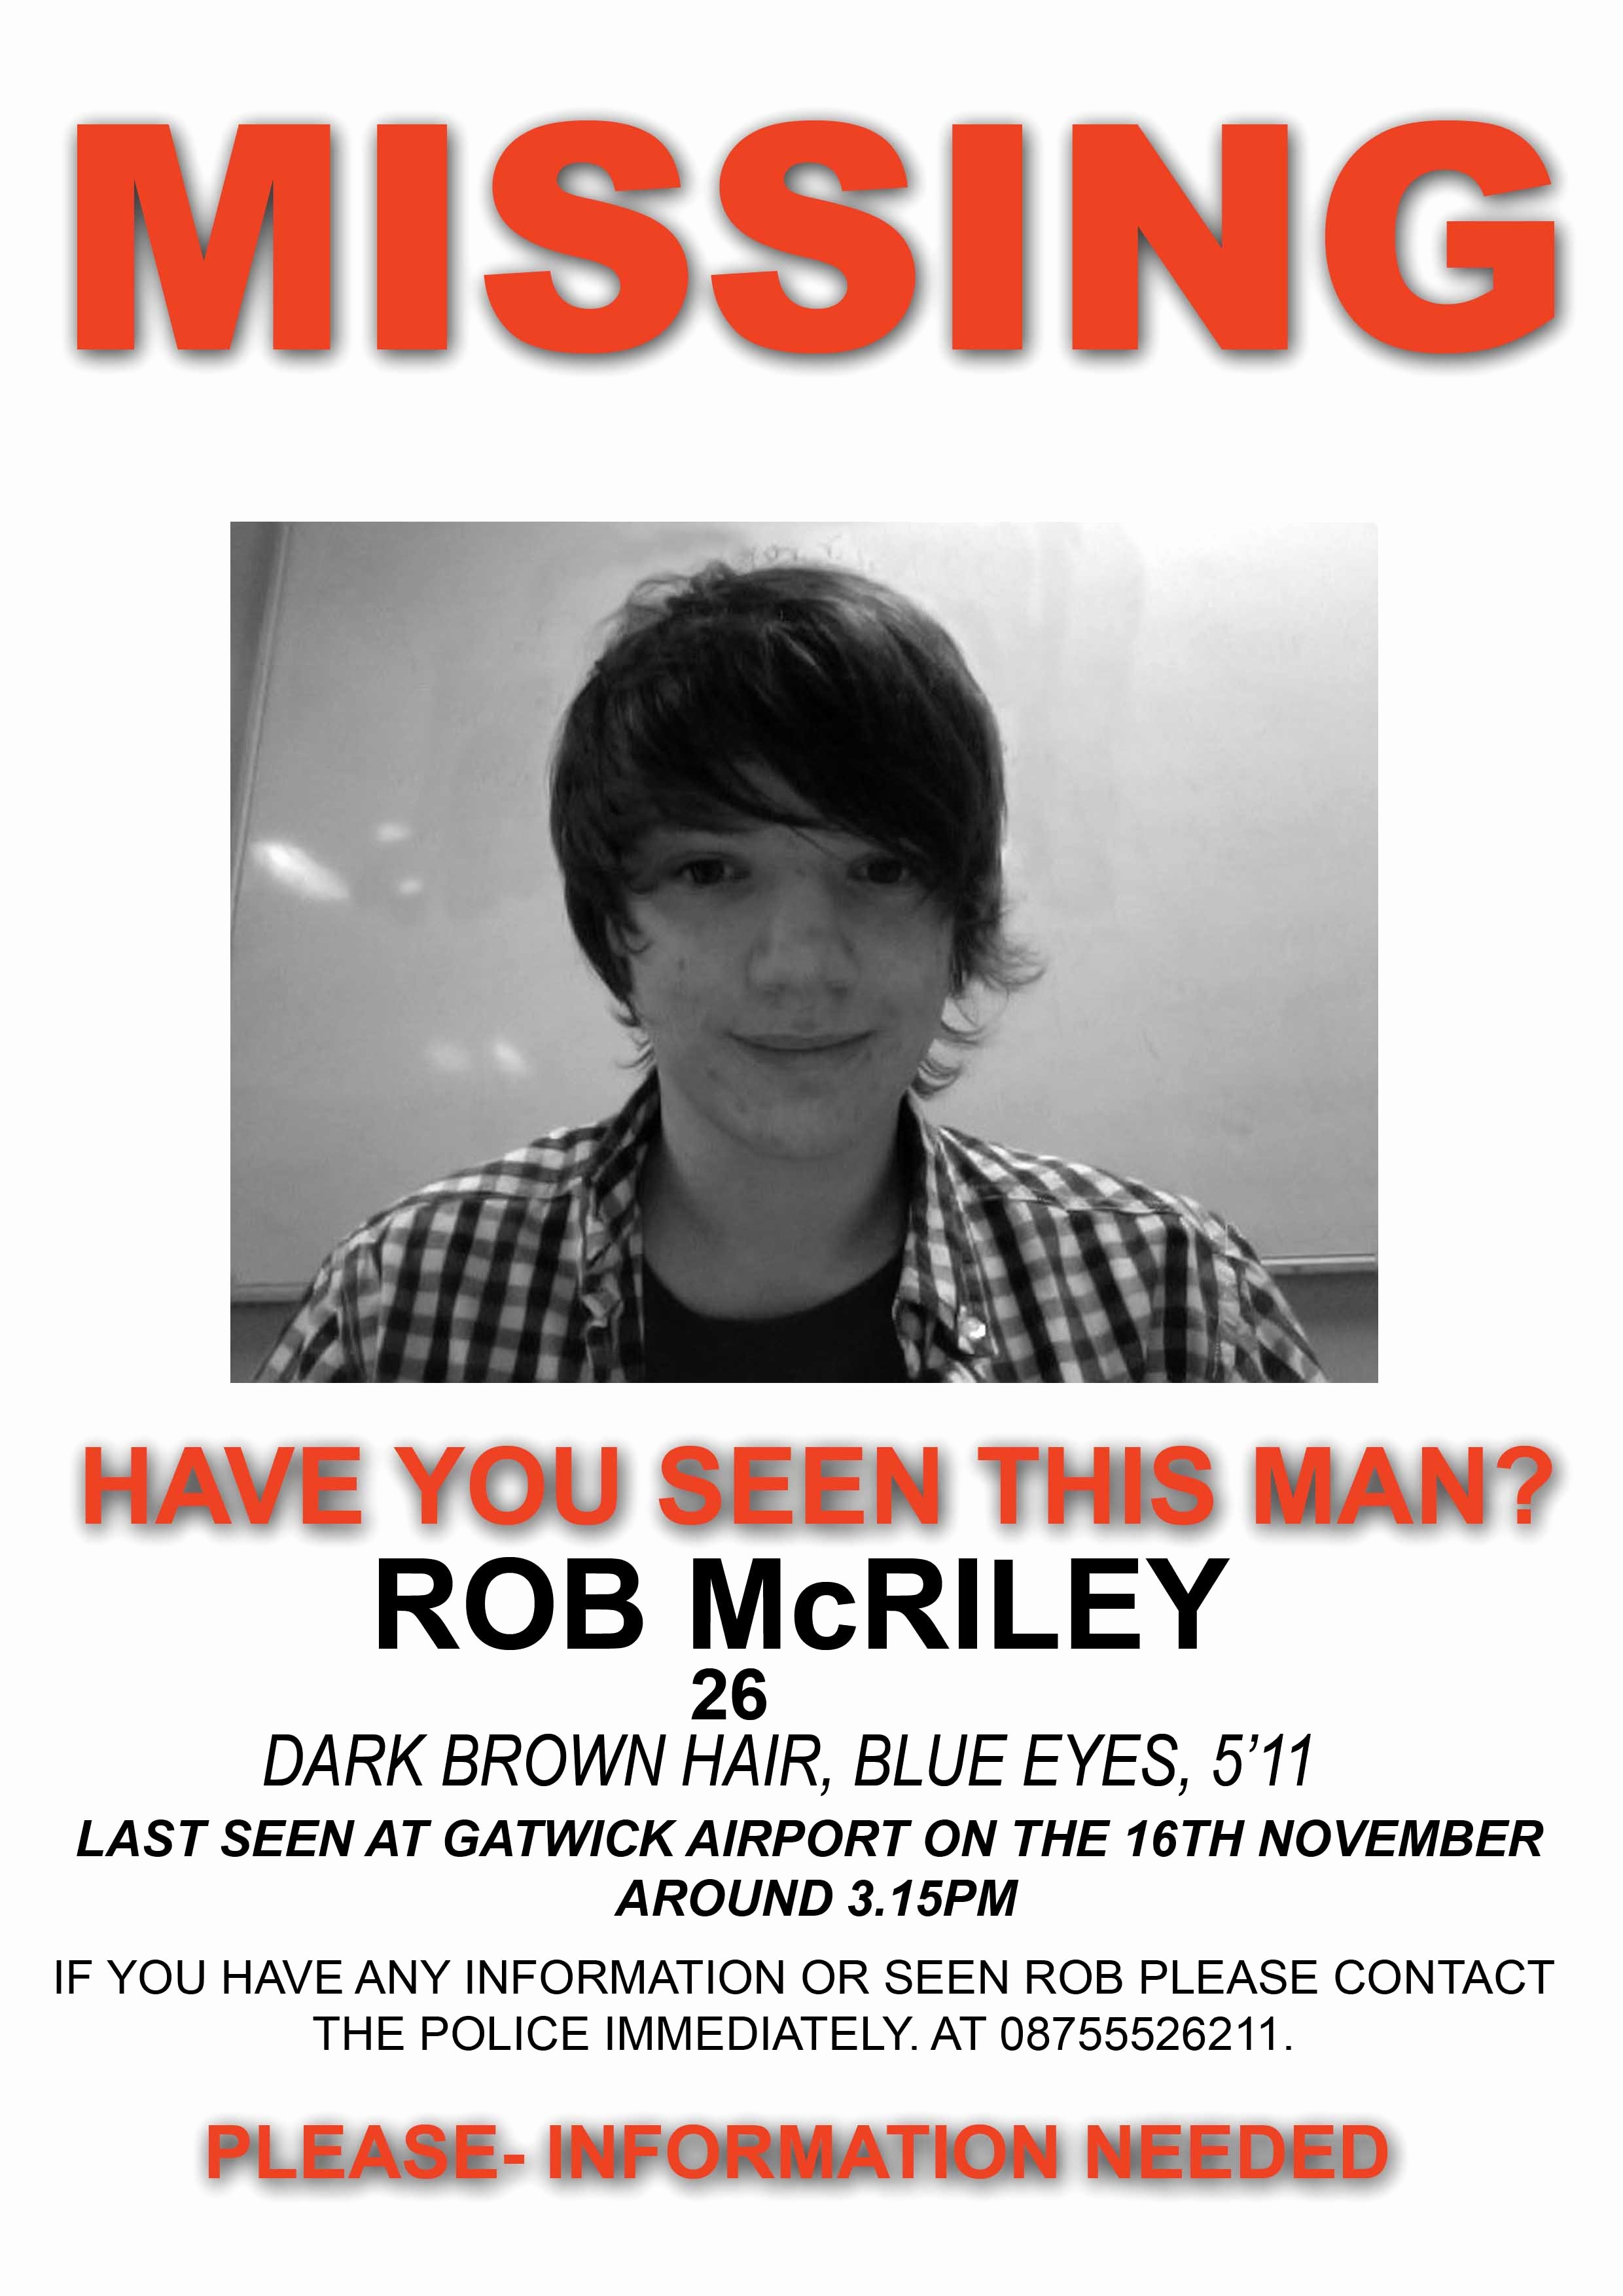 Missing Person Poster Template Inspirational Creating A Missing Poster for Rob Mcriley Post 1